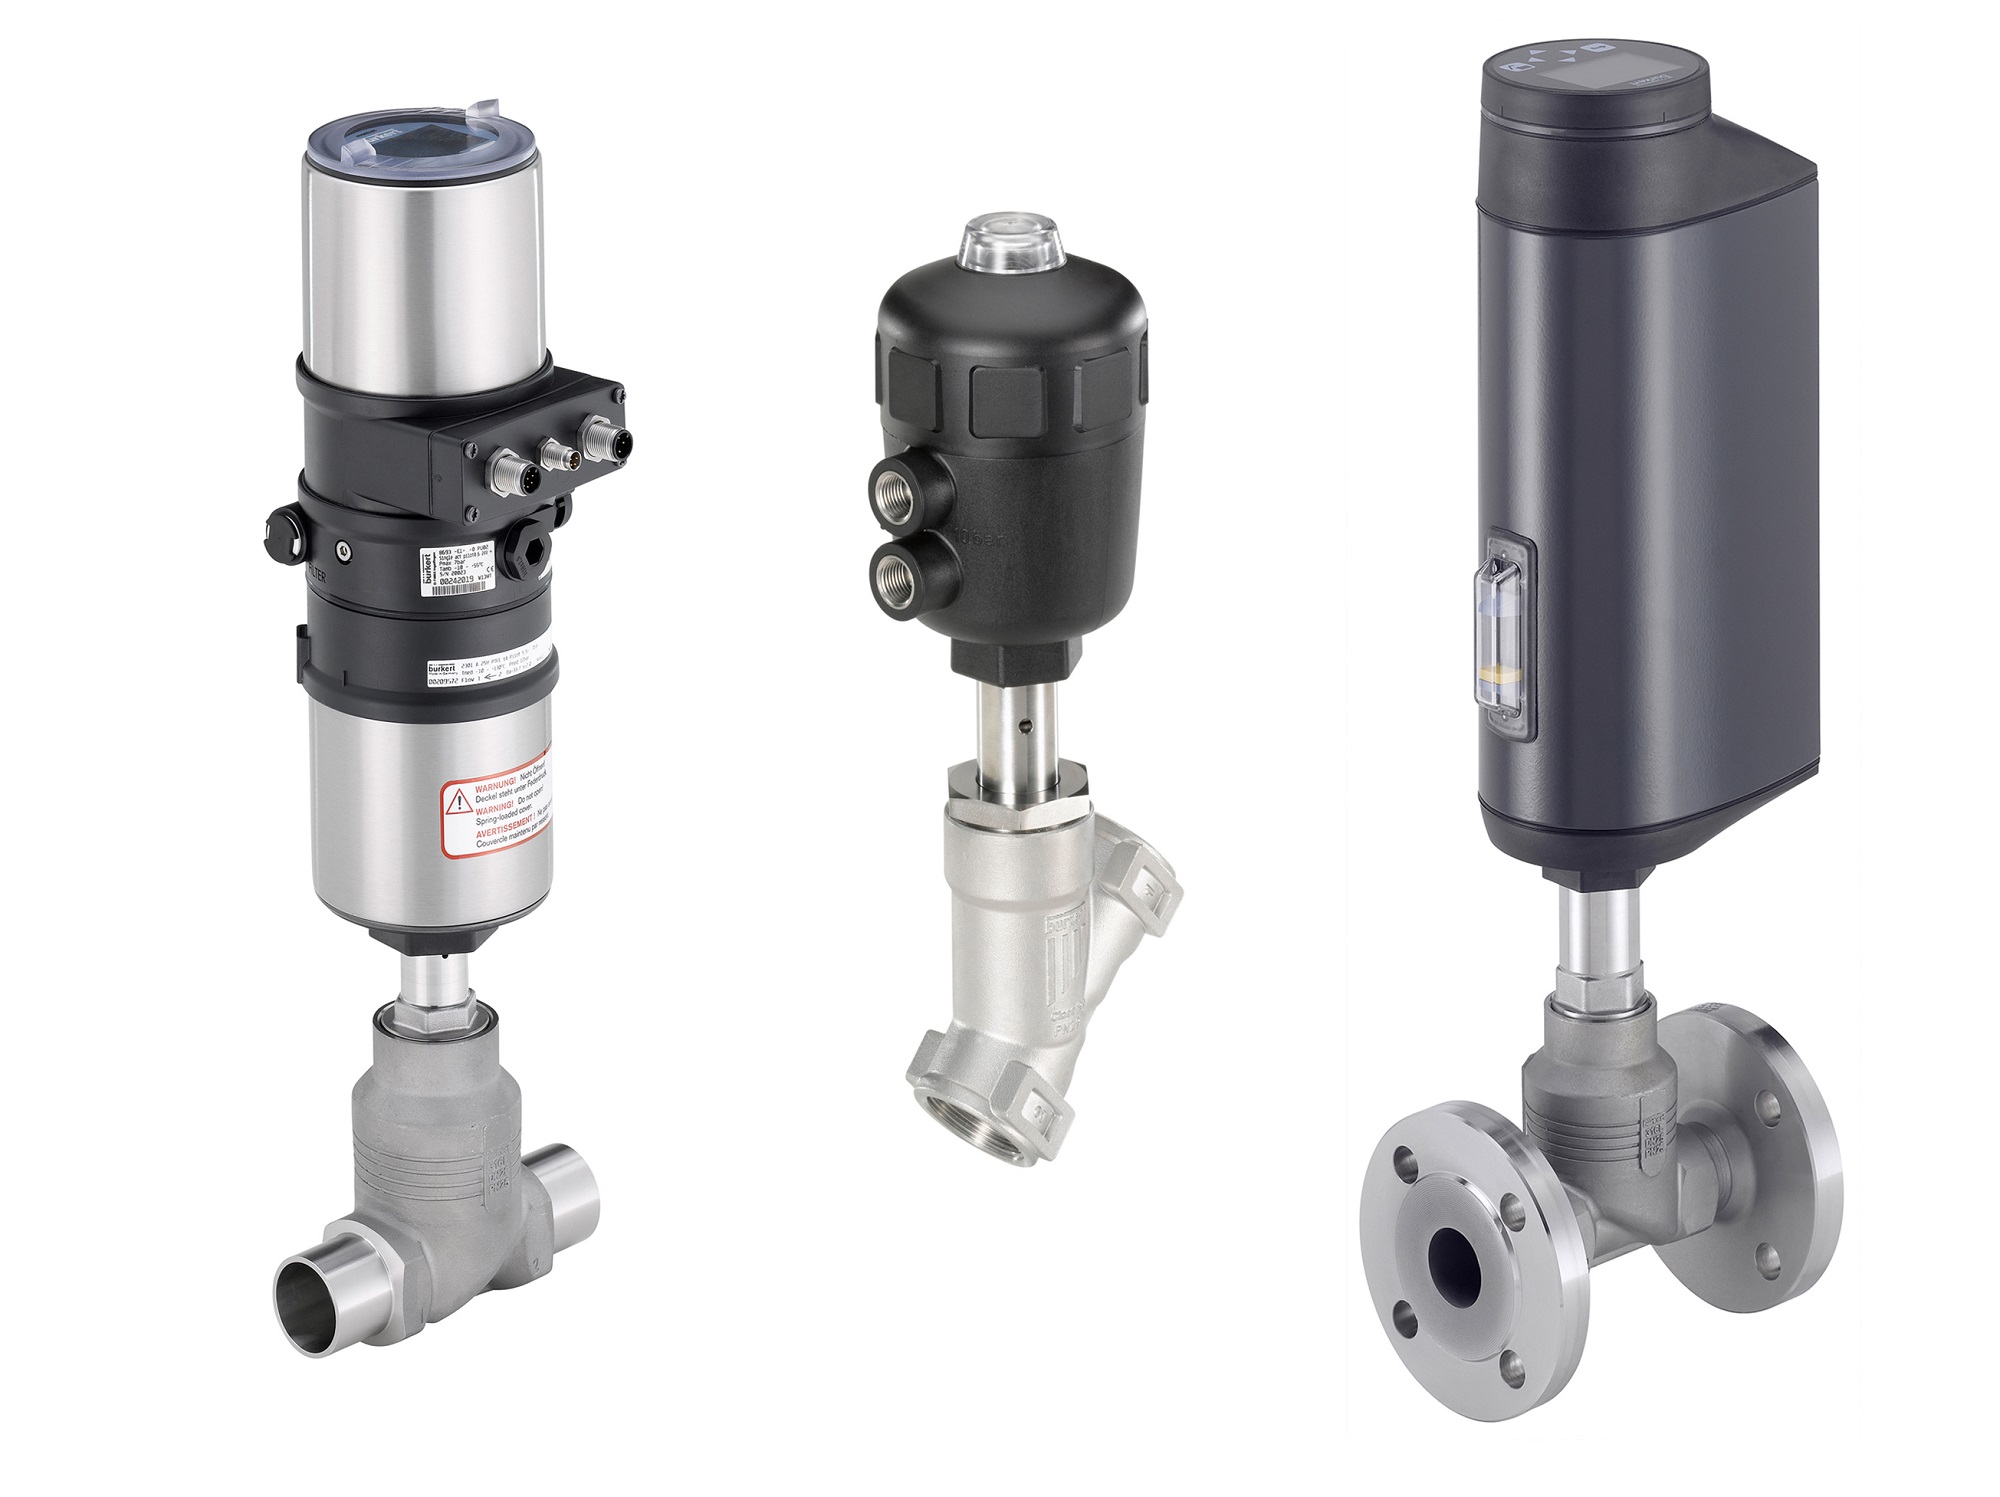 The seat valves with increased pressure and temperature range easily control and switch media with up to 25 bar overpressure and temperatures from 40°C to 230°C. (Image: Bürkert Fluid Control Systems)